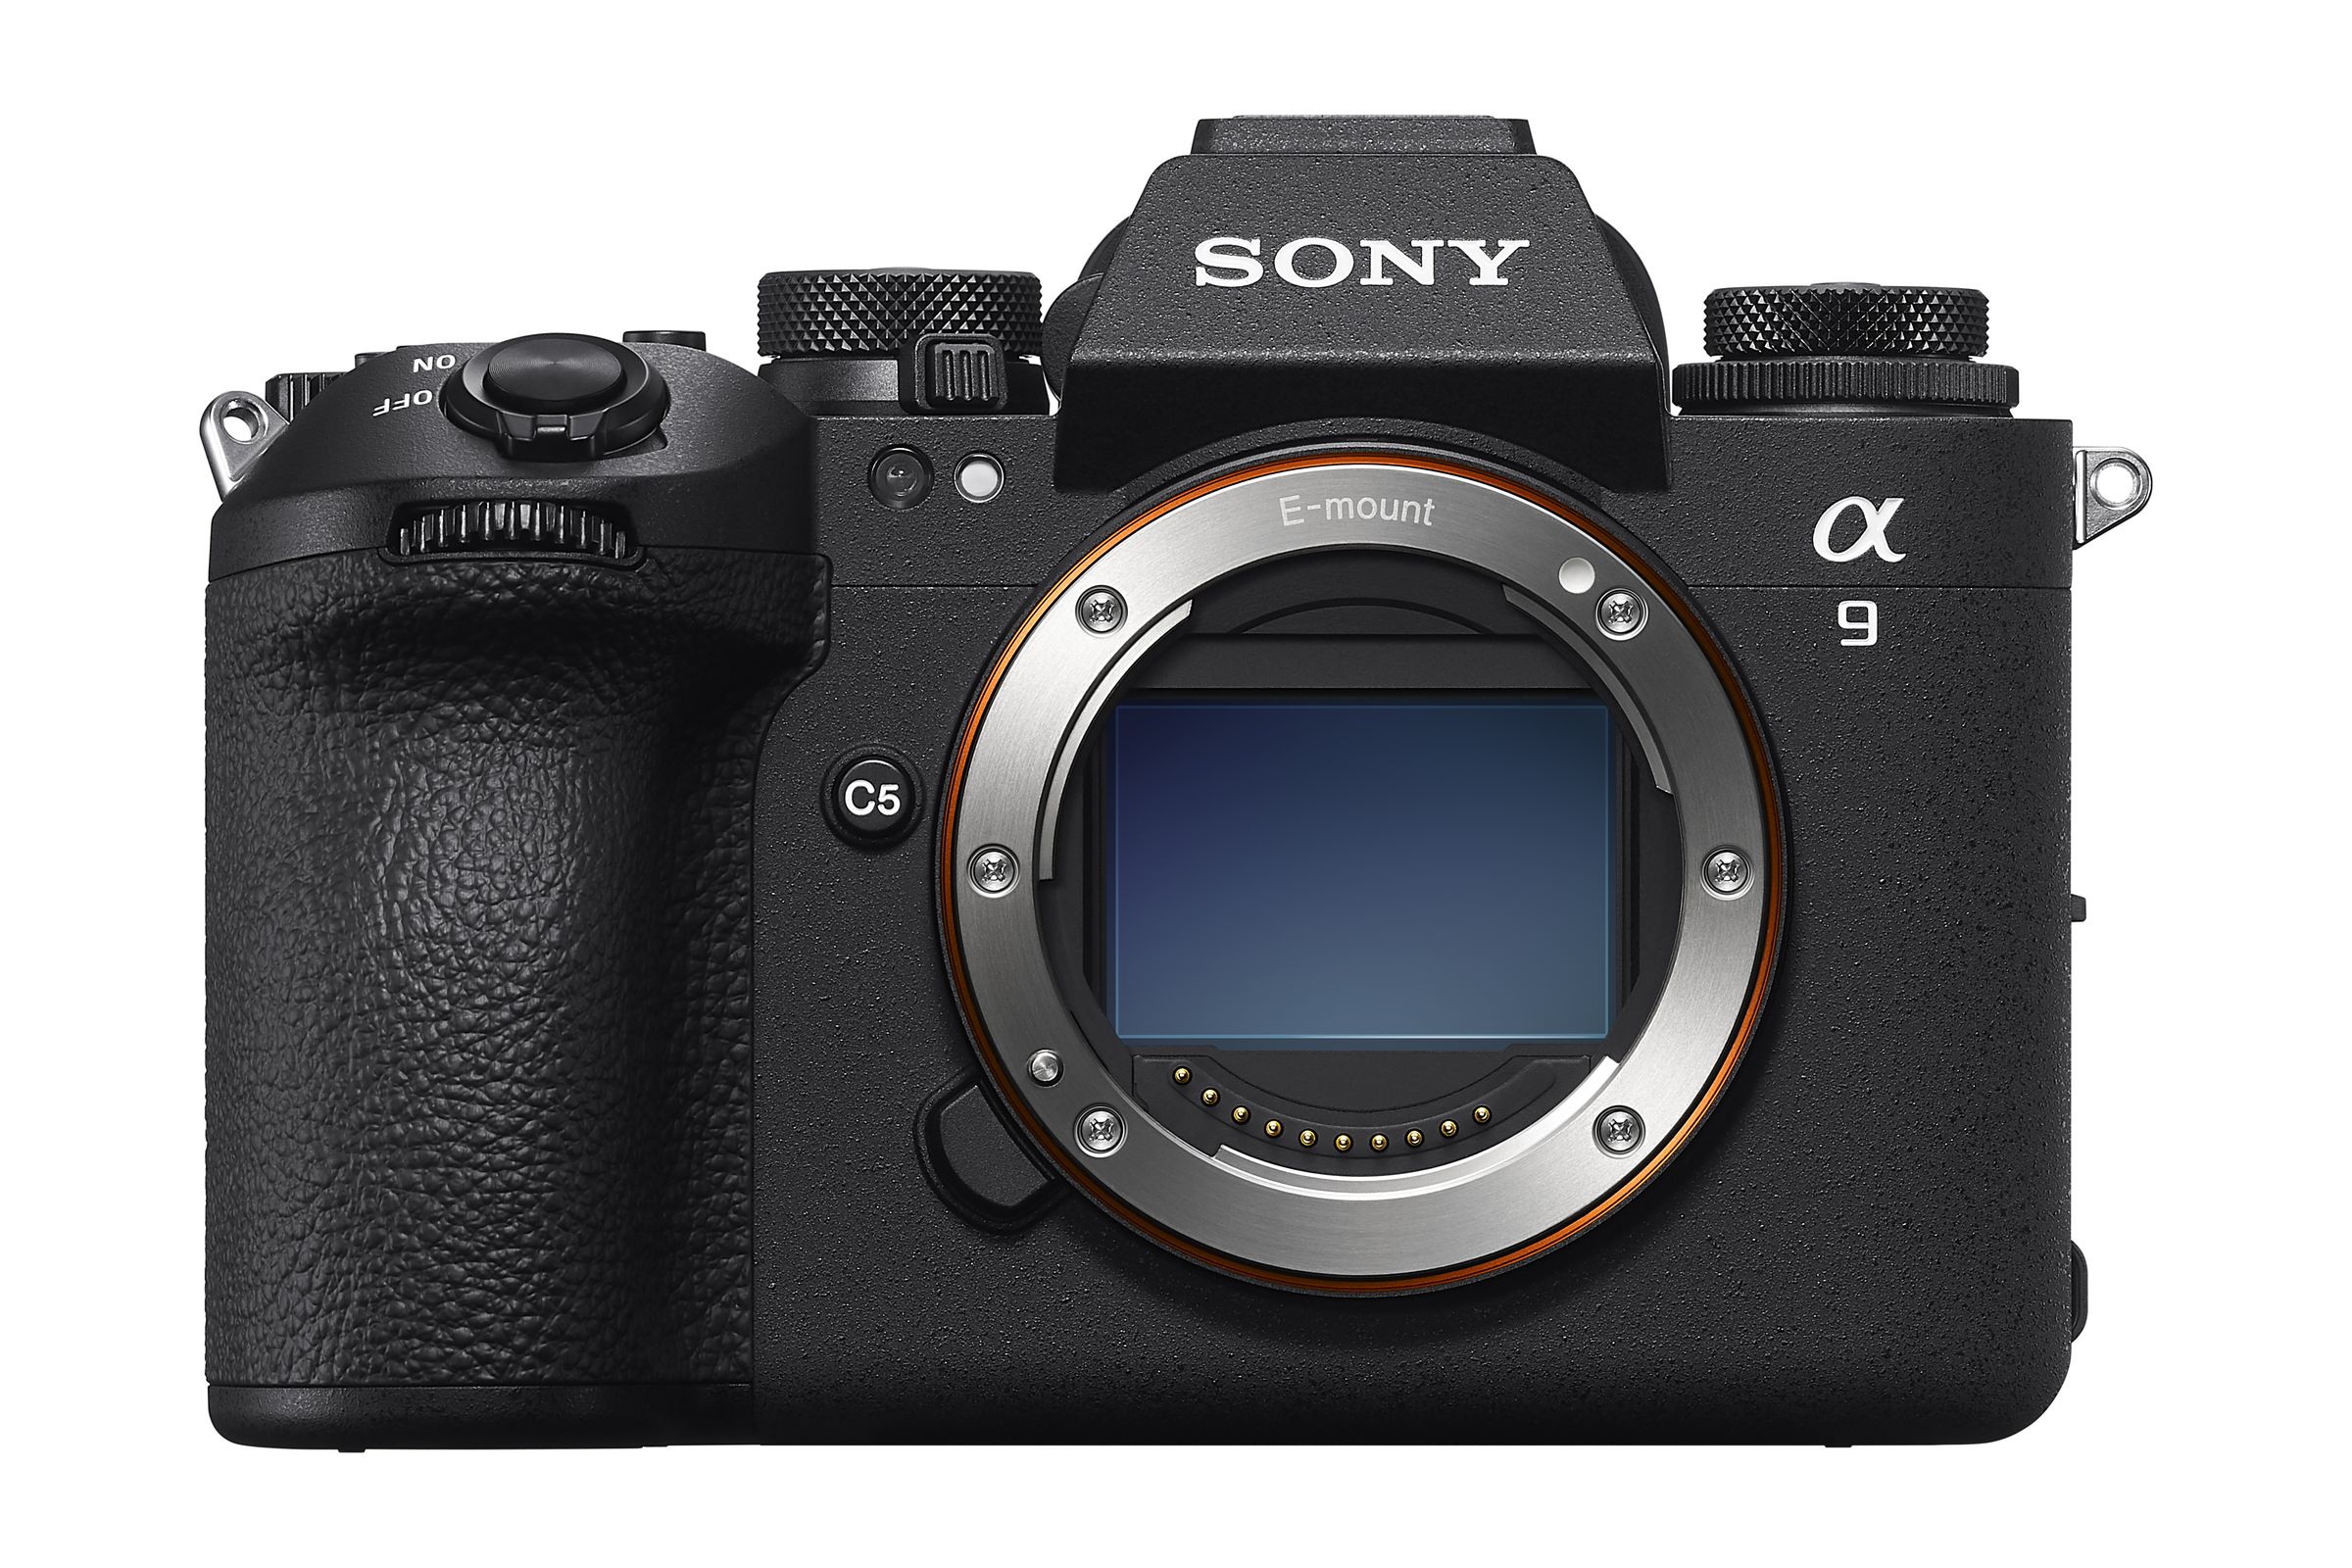 The Sony A9 III features the company’s first global shutter in a full-frame mirrorless camera.